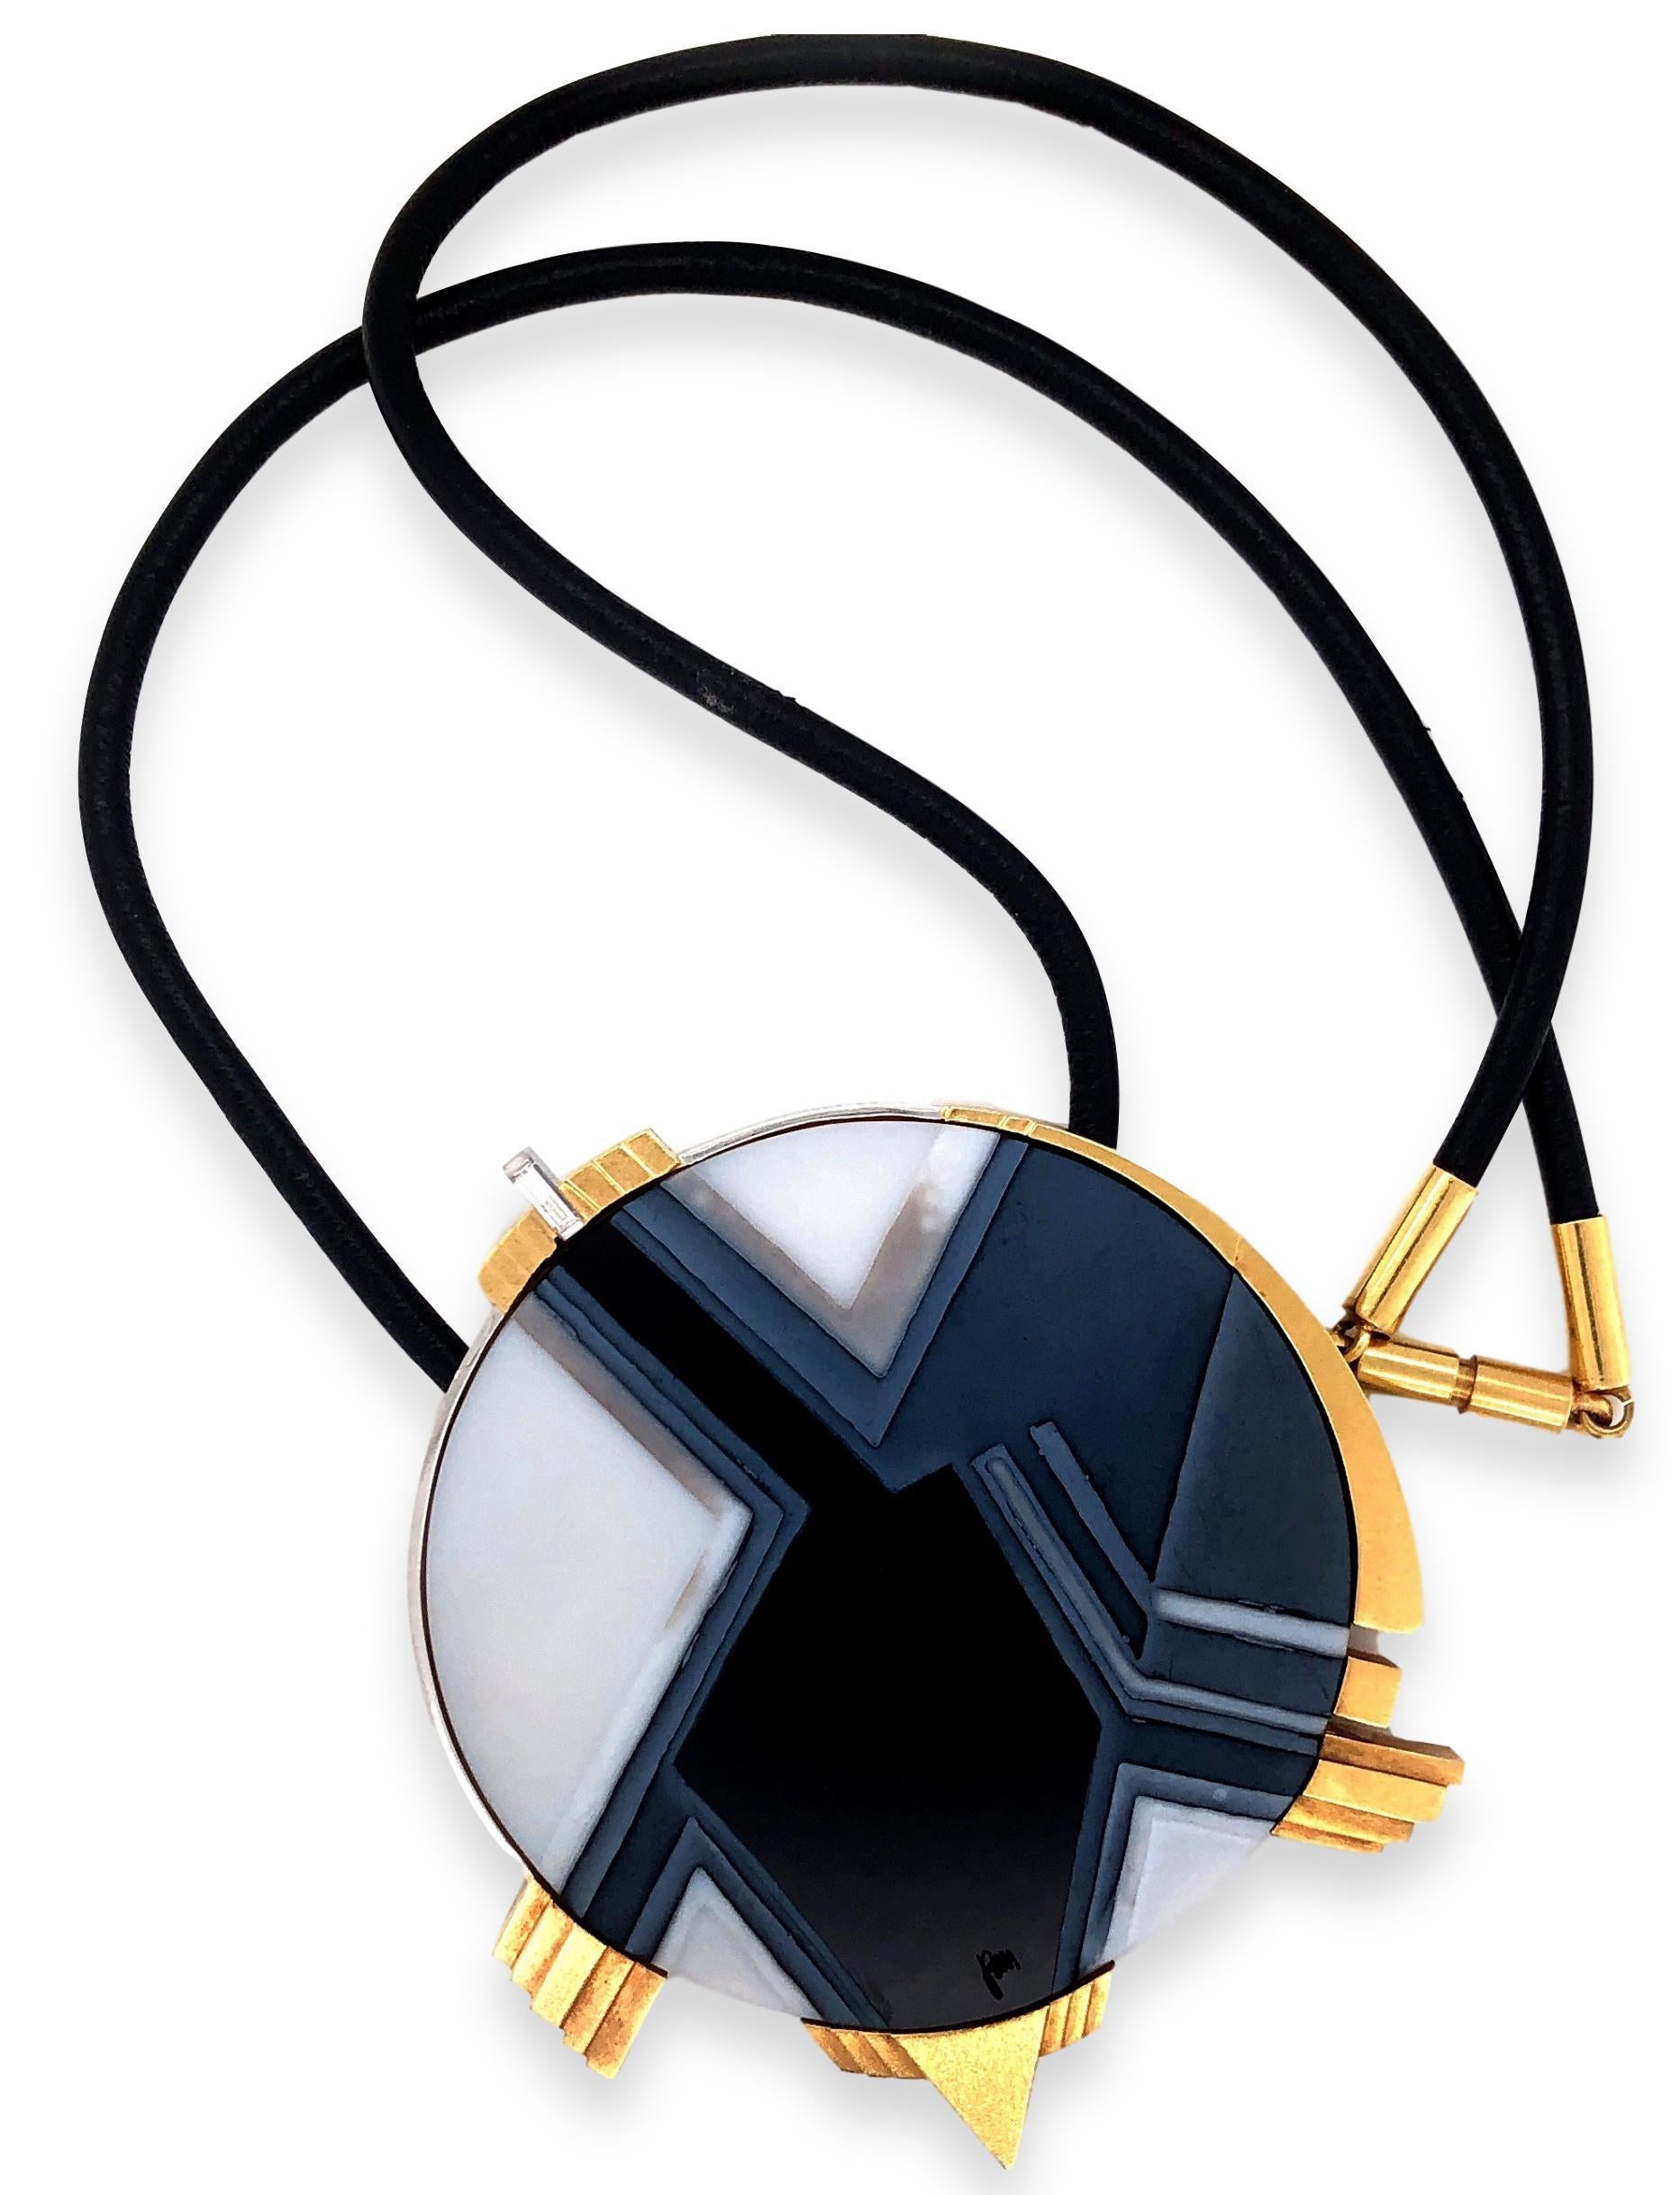 Carved black and white agate pendant/brooch necklace by Atelier Munsteiner. The 2